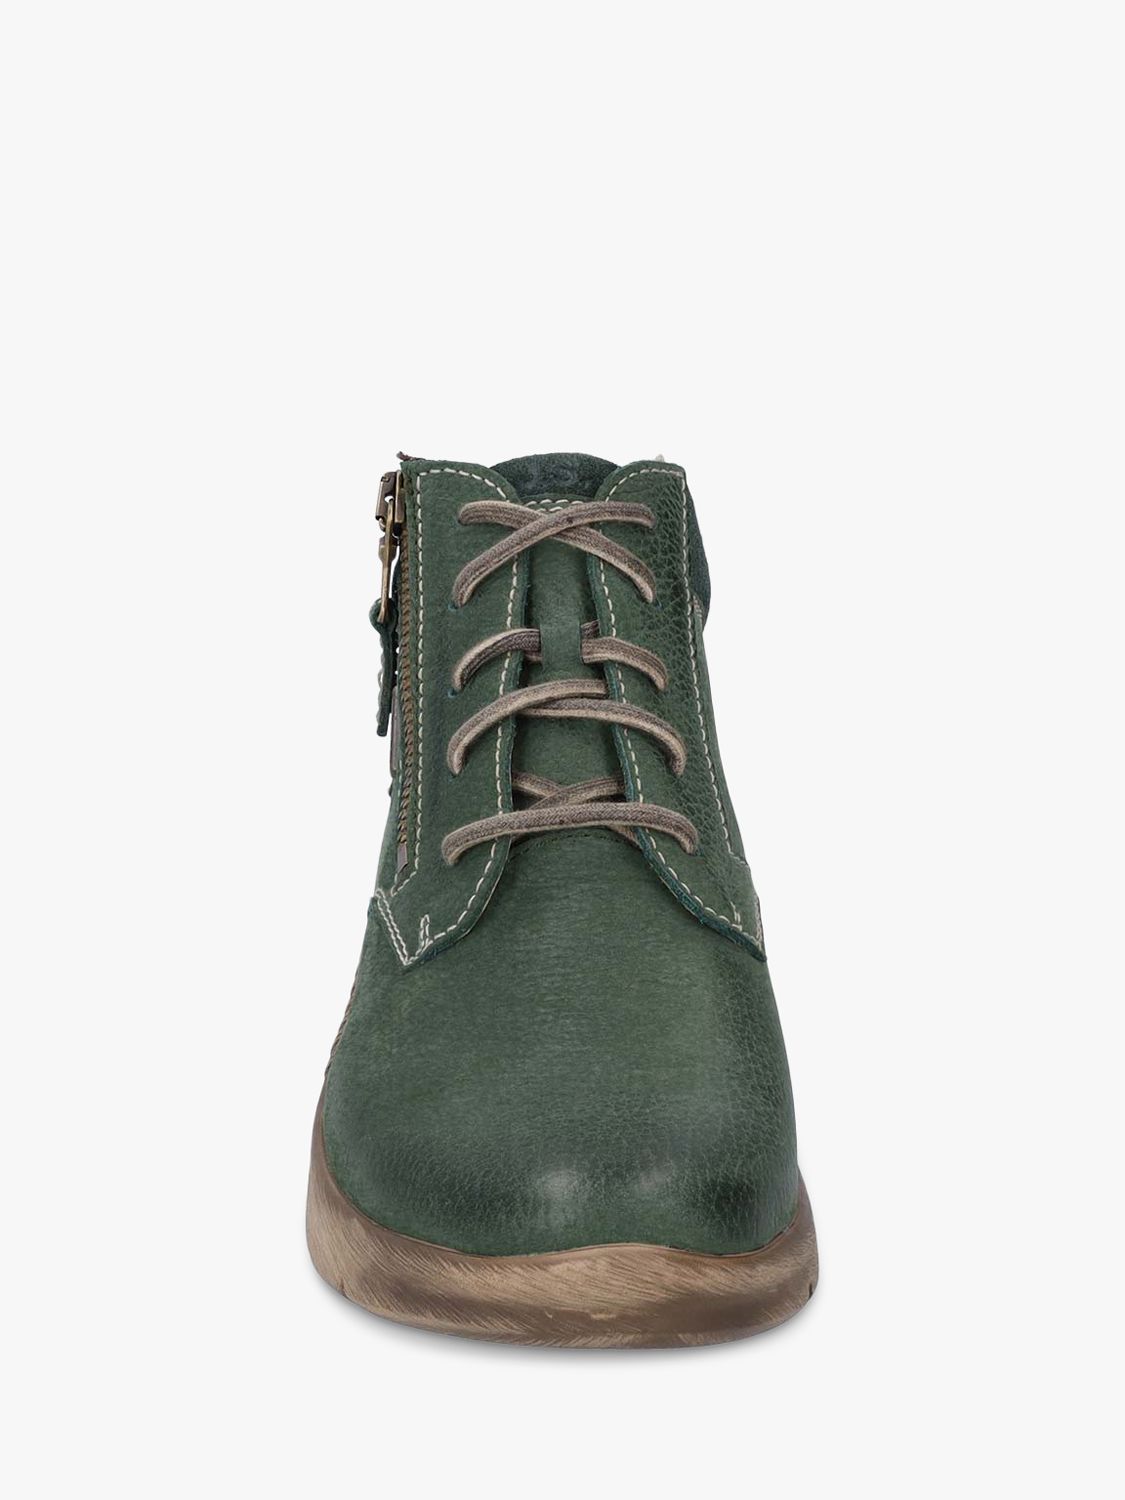 Josef Seibel Conny 52 Waterproof Leather Lace Up Ankle Boots, Green at ...